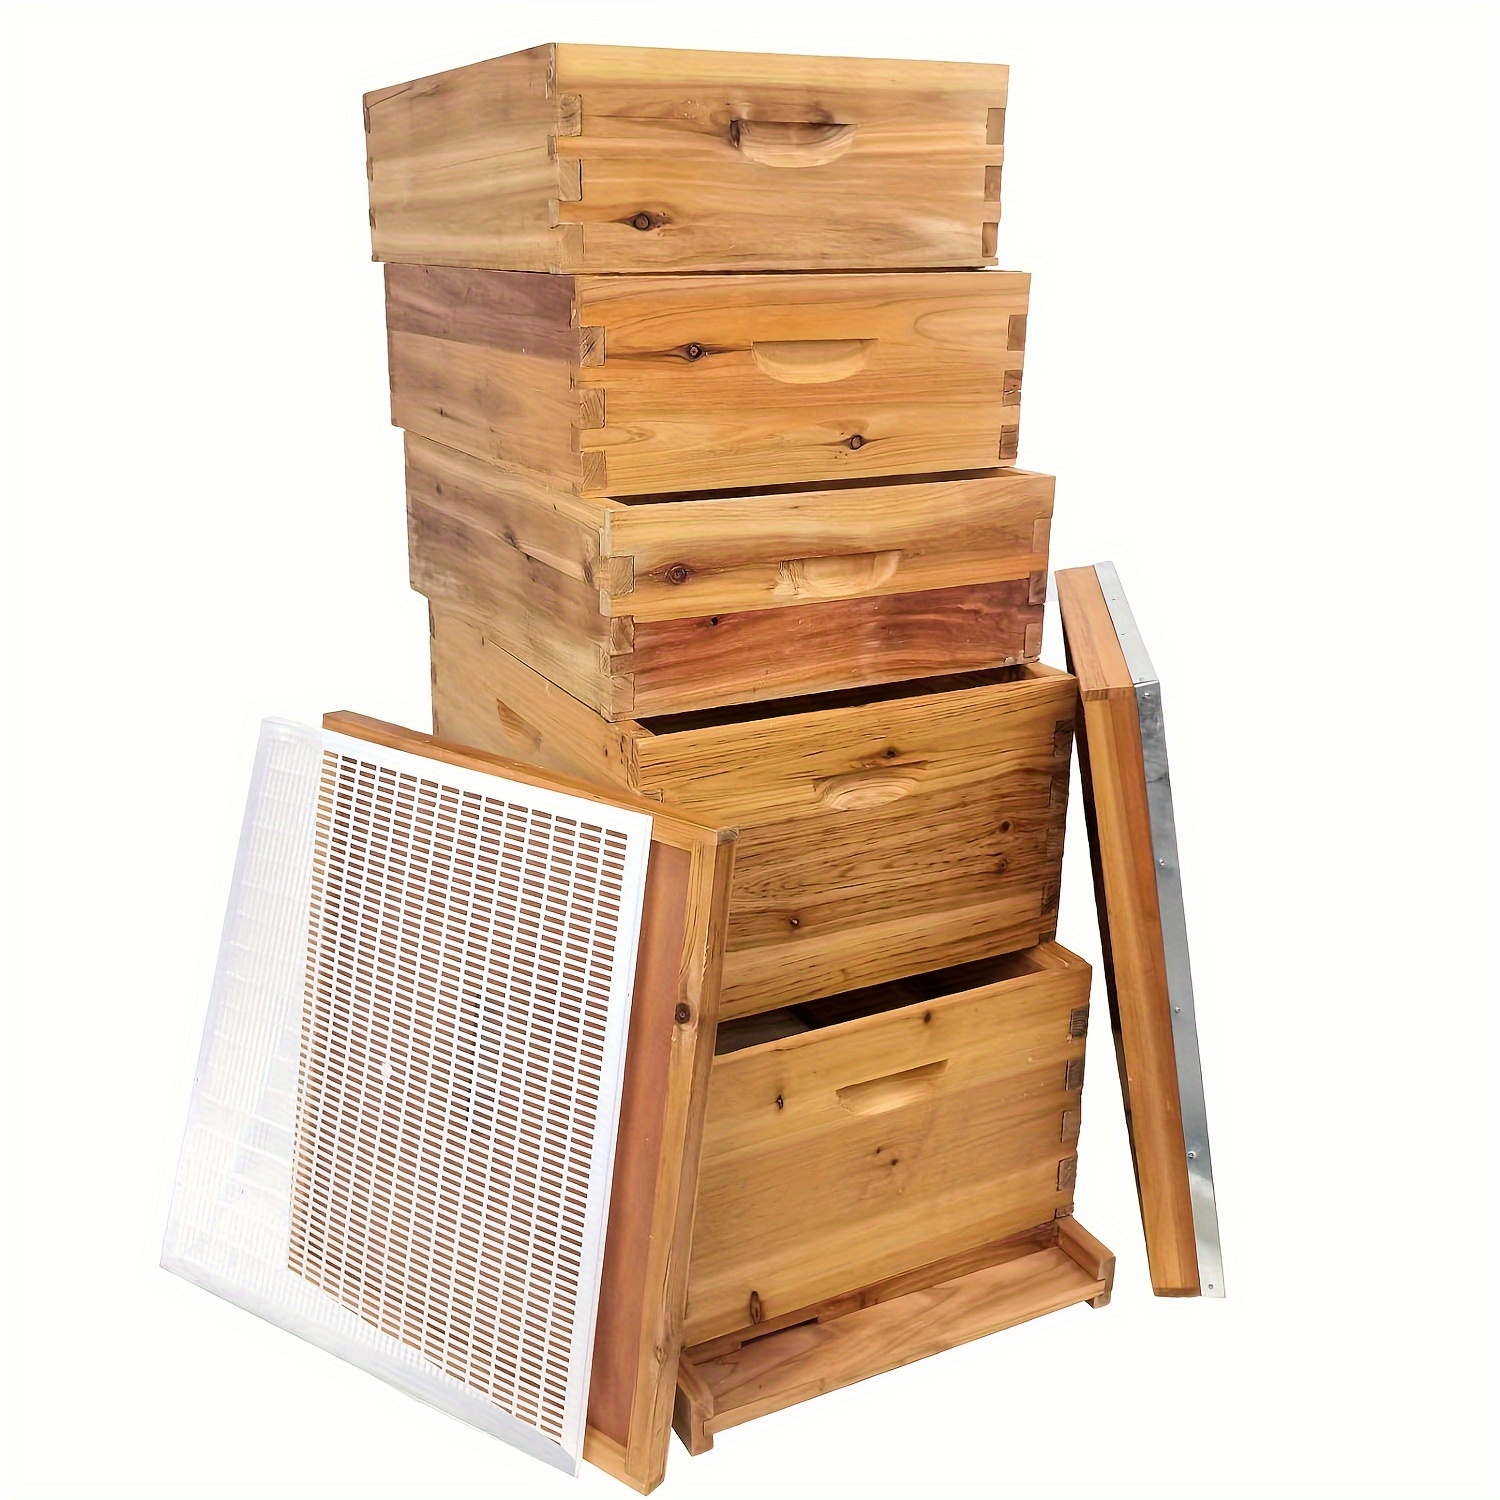 

5/3-layer Bee Hive Without Frames, Beehive Kit Langstroth Bee Hive Coated With 100% Beeswax Includes Deep Bee Boxes, Medium Bee Hive Super For Beginners